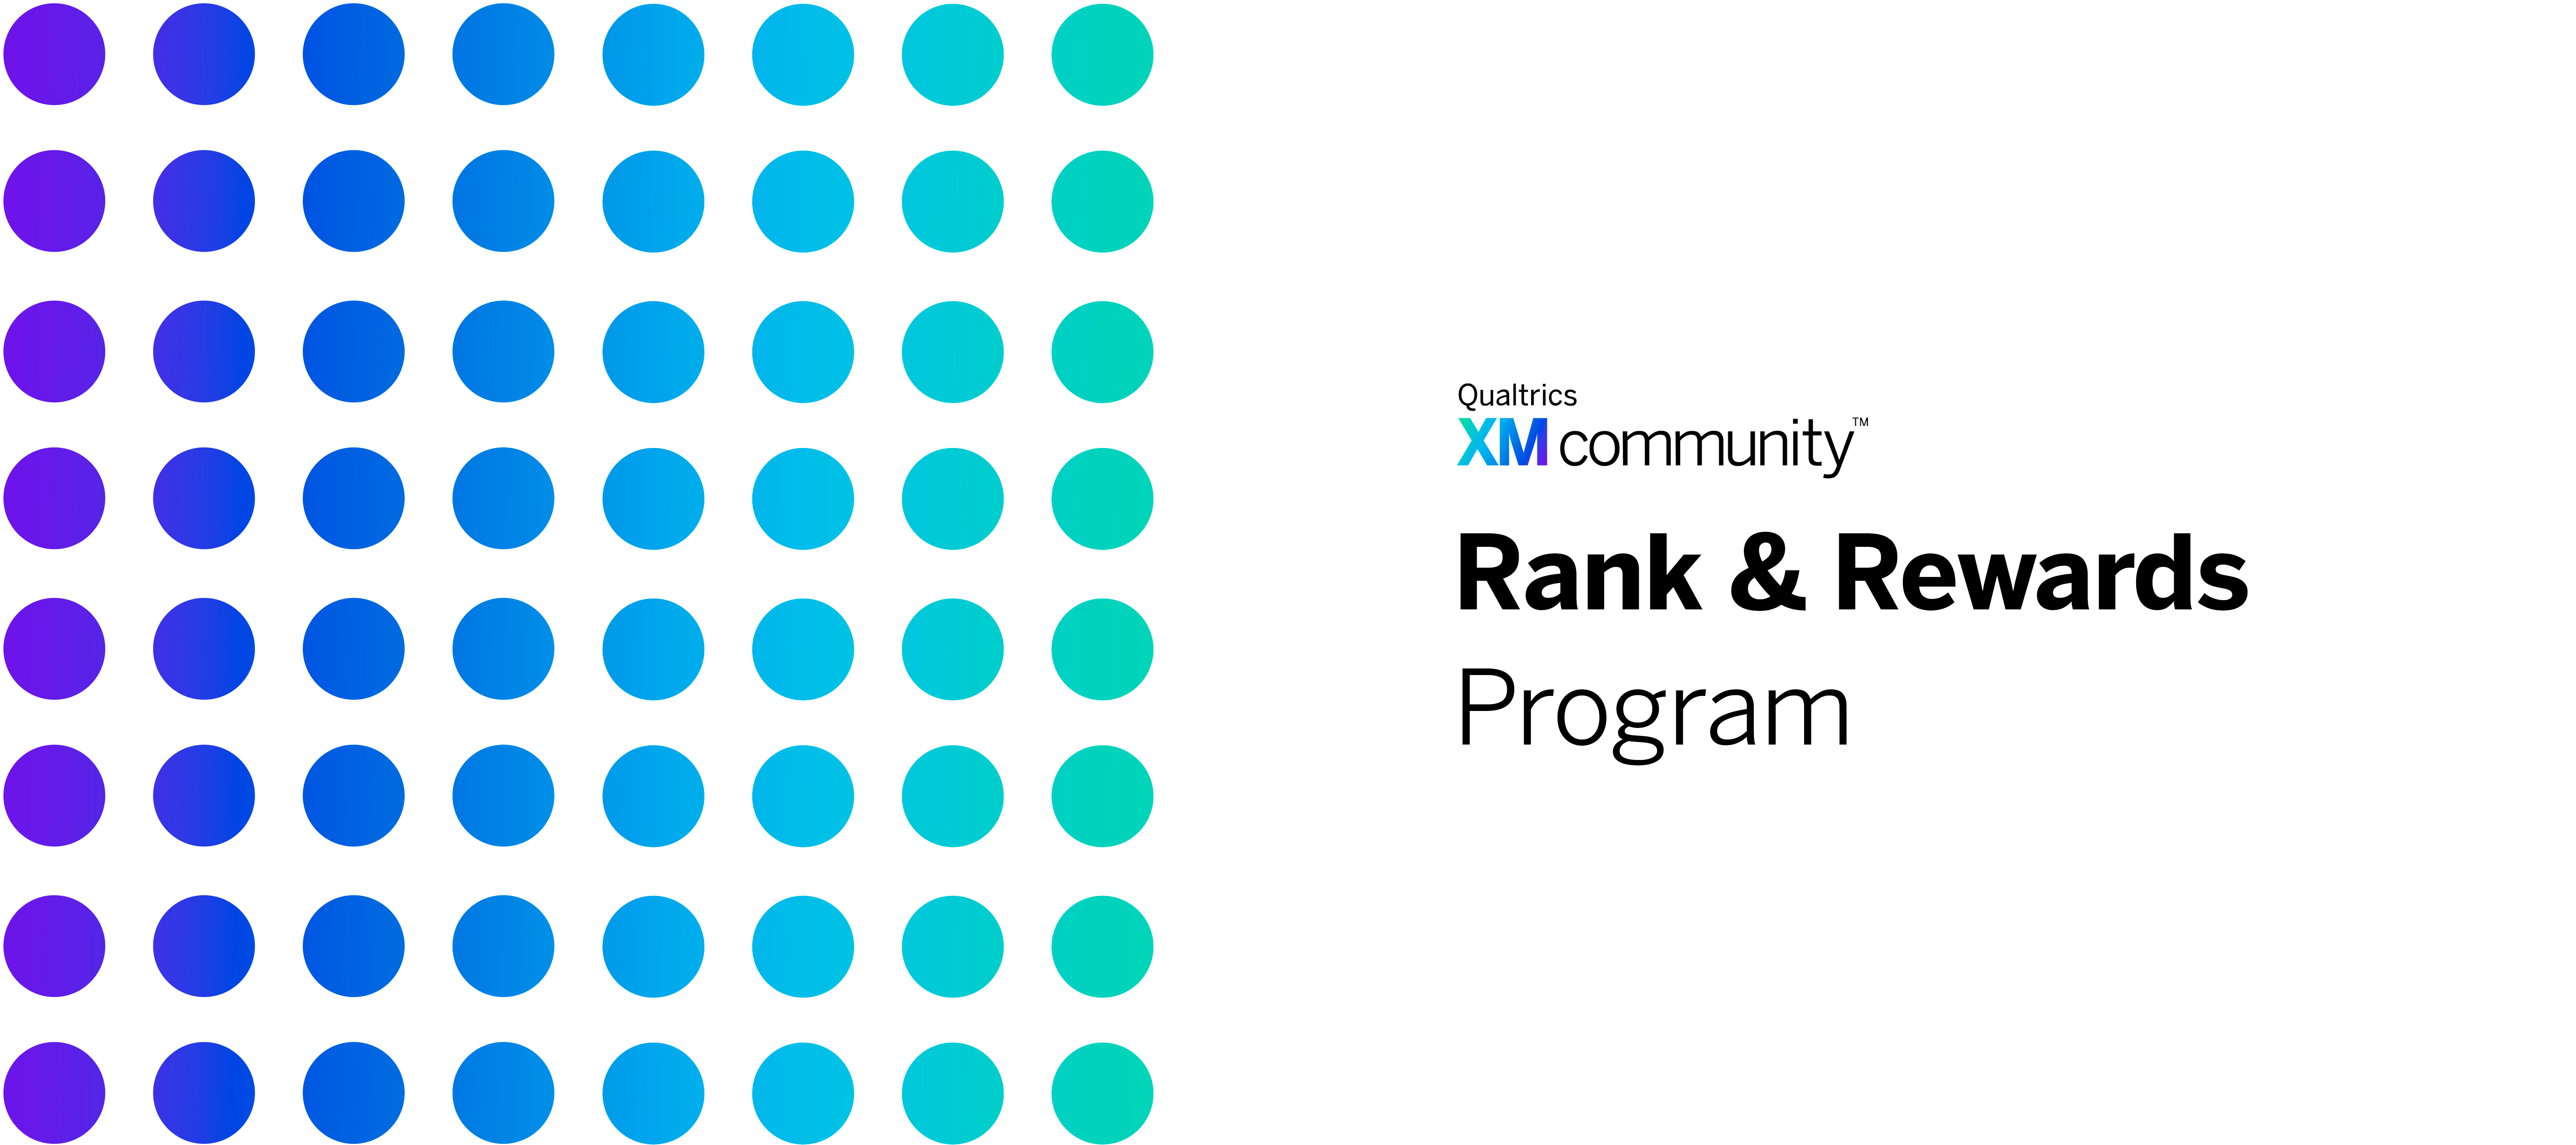 What Would You Like to See Offered in Our Rank and Rewards Program?